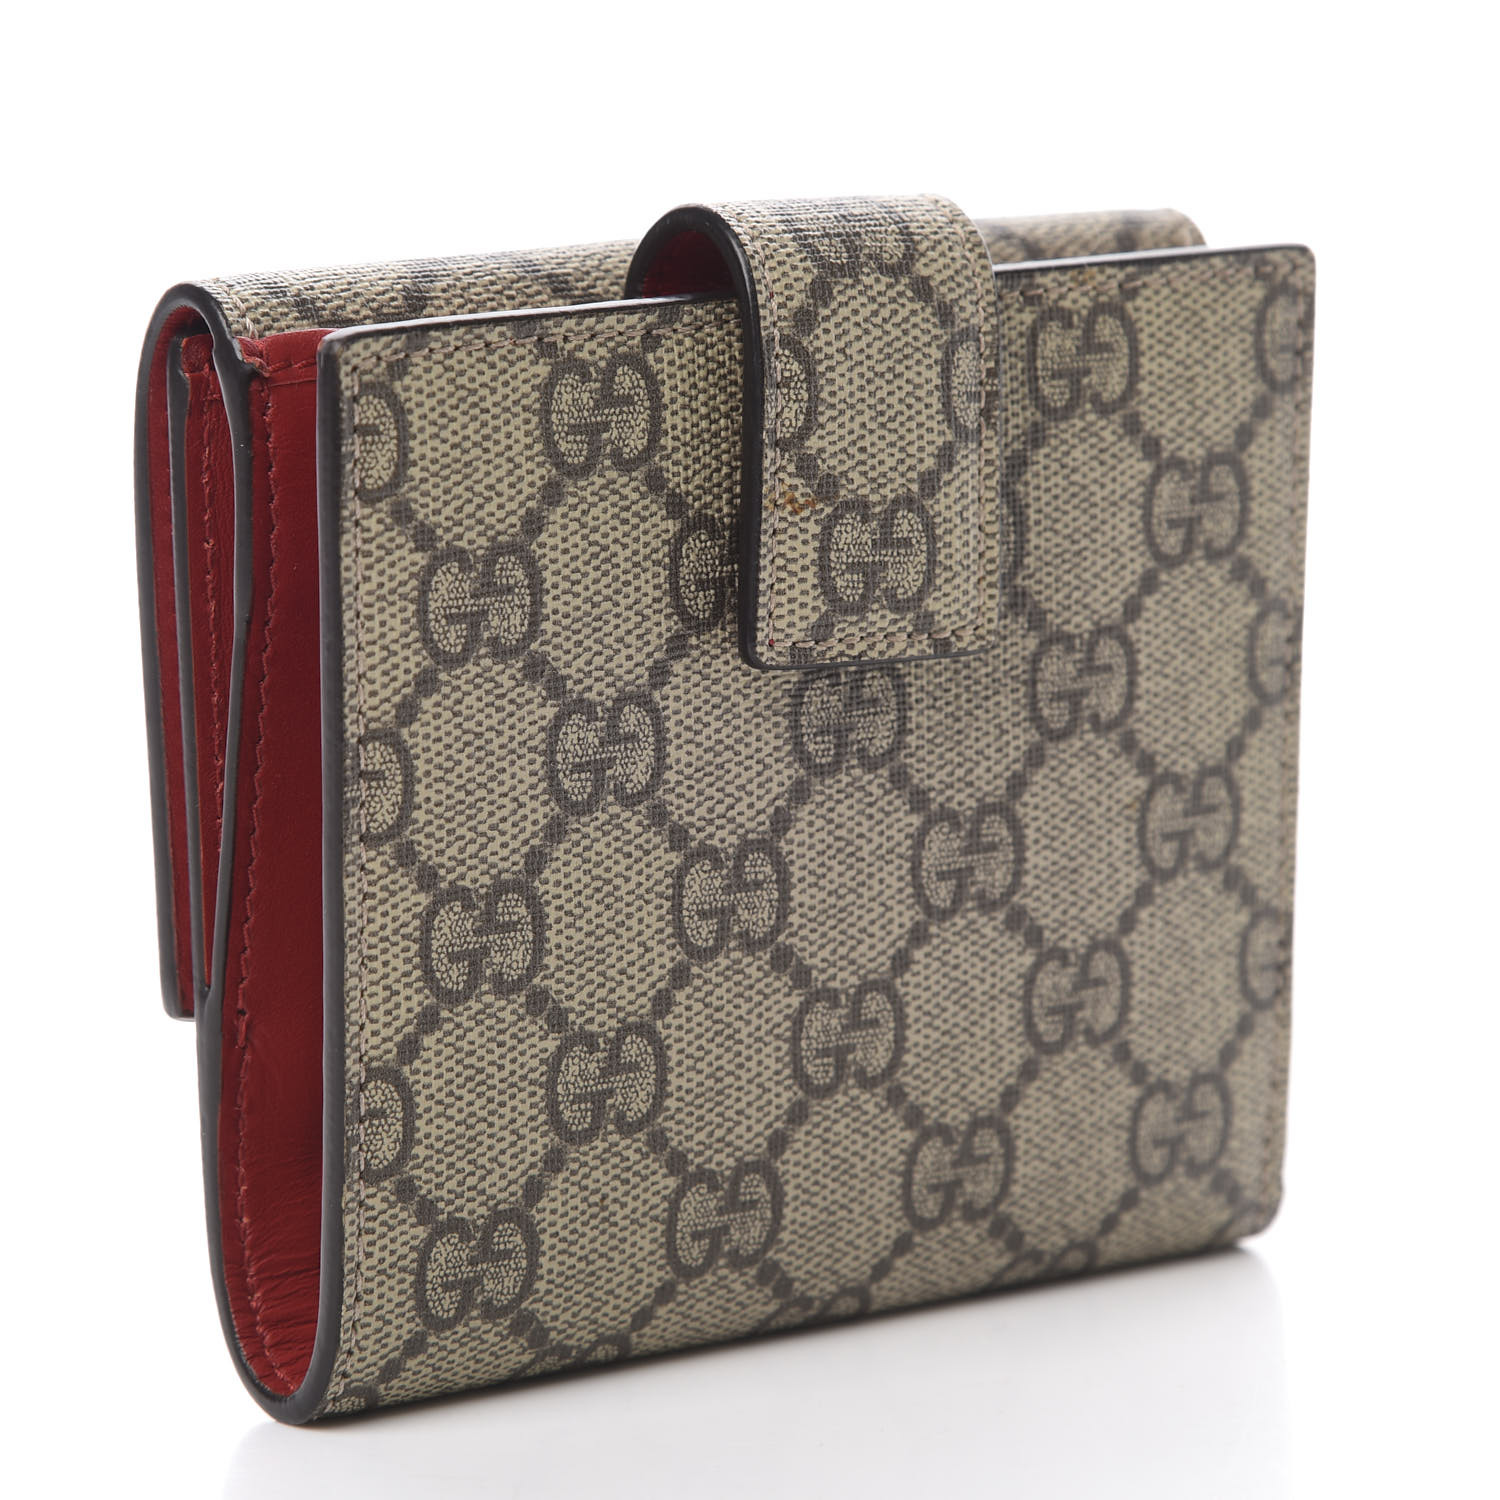 GUCCI GG Supreme Monogram Cherry Embellished Card Case Wallet Hibiscus ...